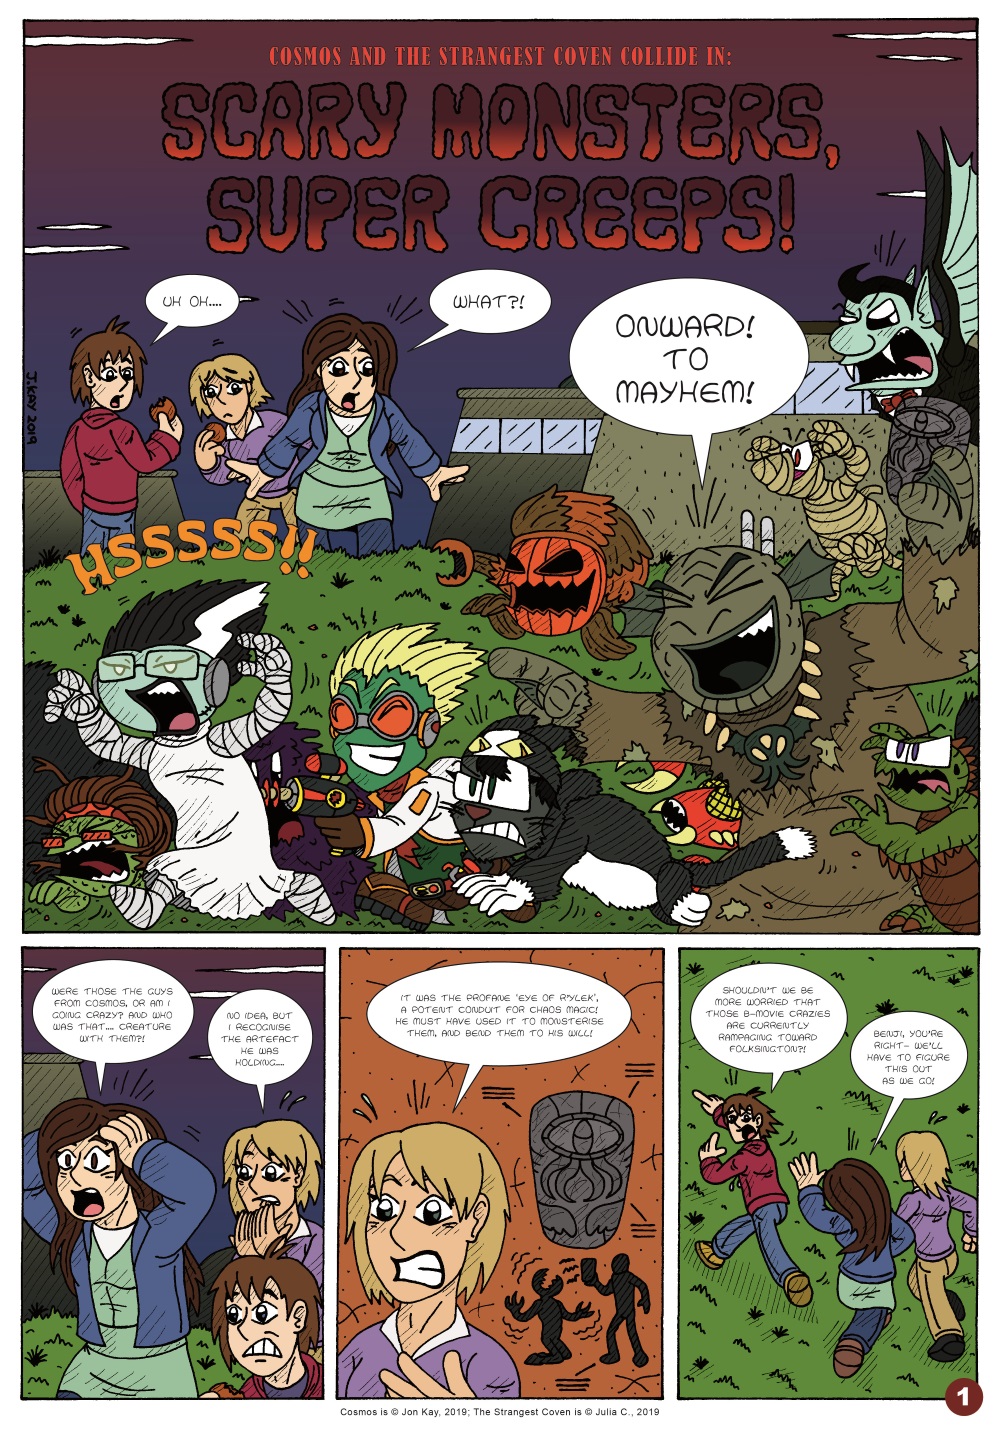 The Strangest Coven by Cartoonist_At_Large 1 out of 5